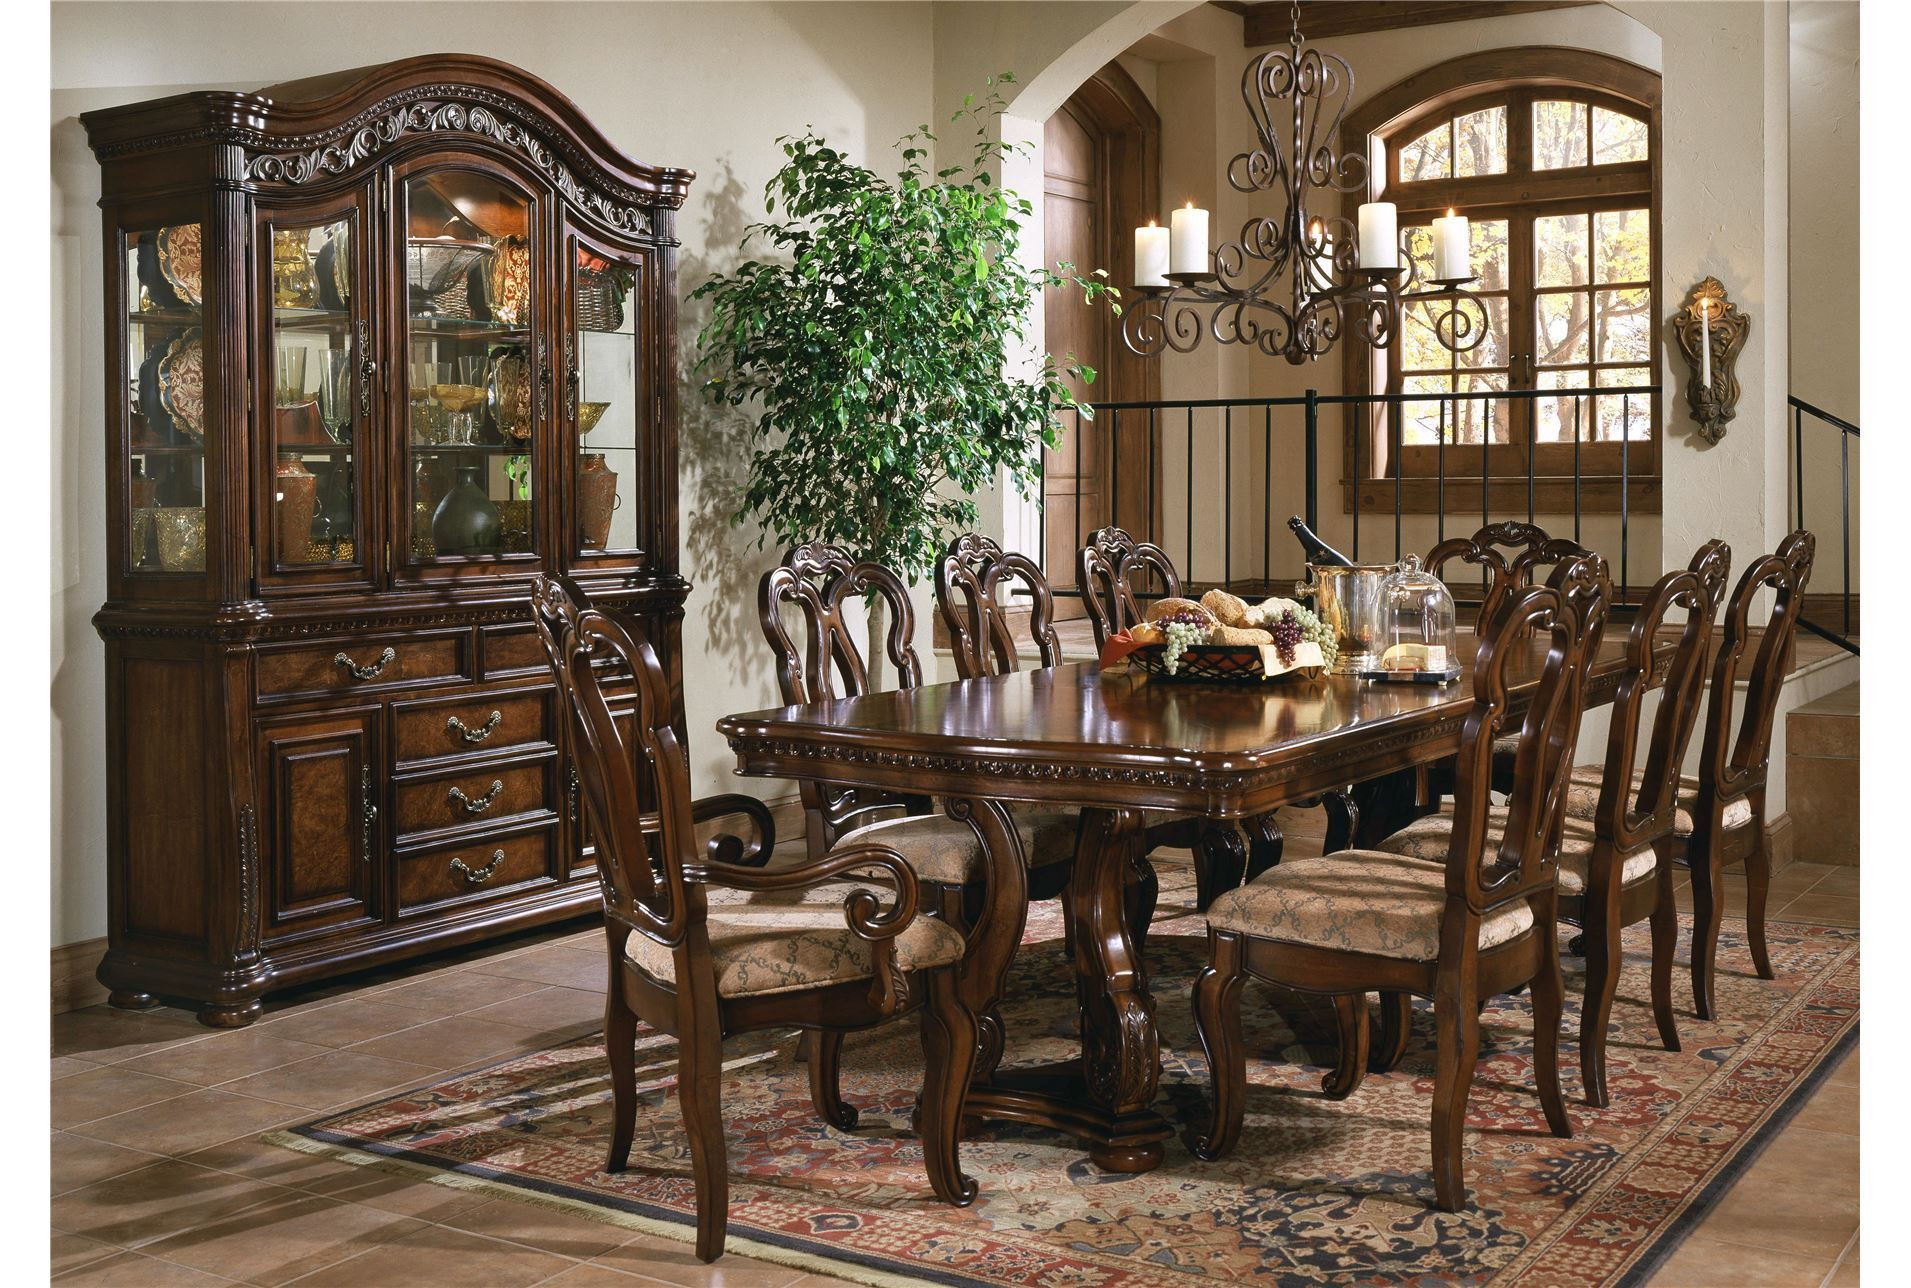 Living Spaces Dining Room Tables
 San Marino 7 Piece Dining Set Living Spaces